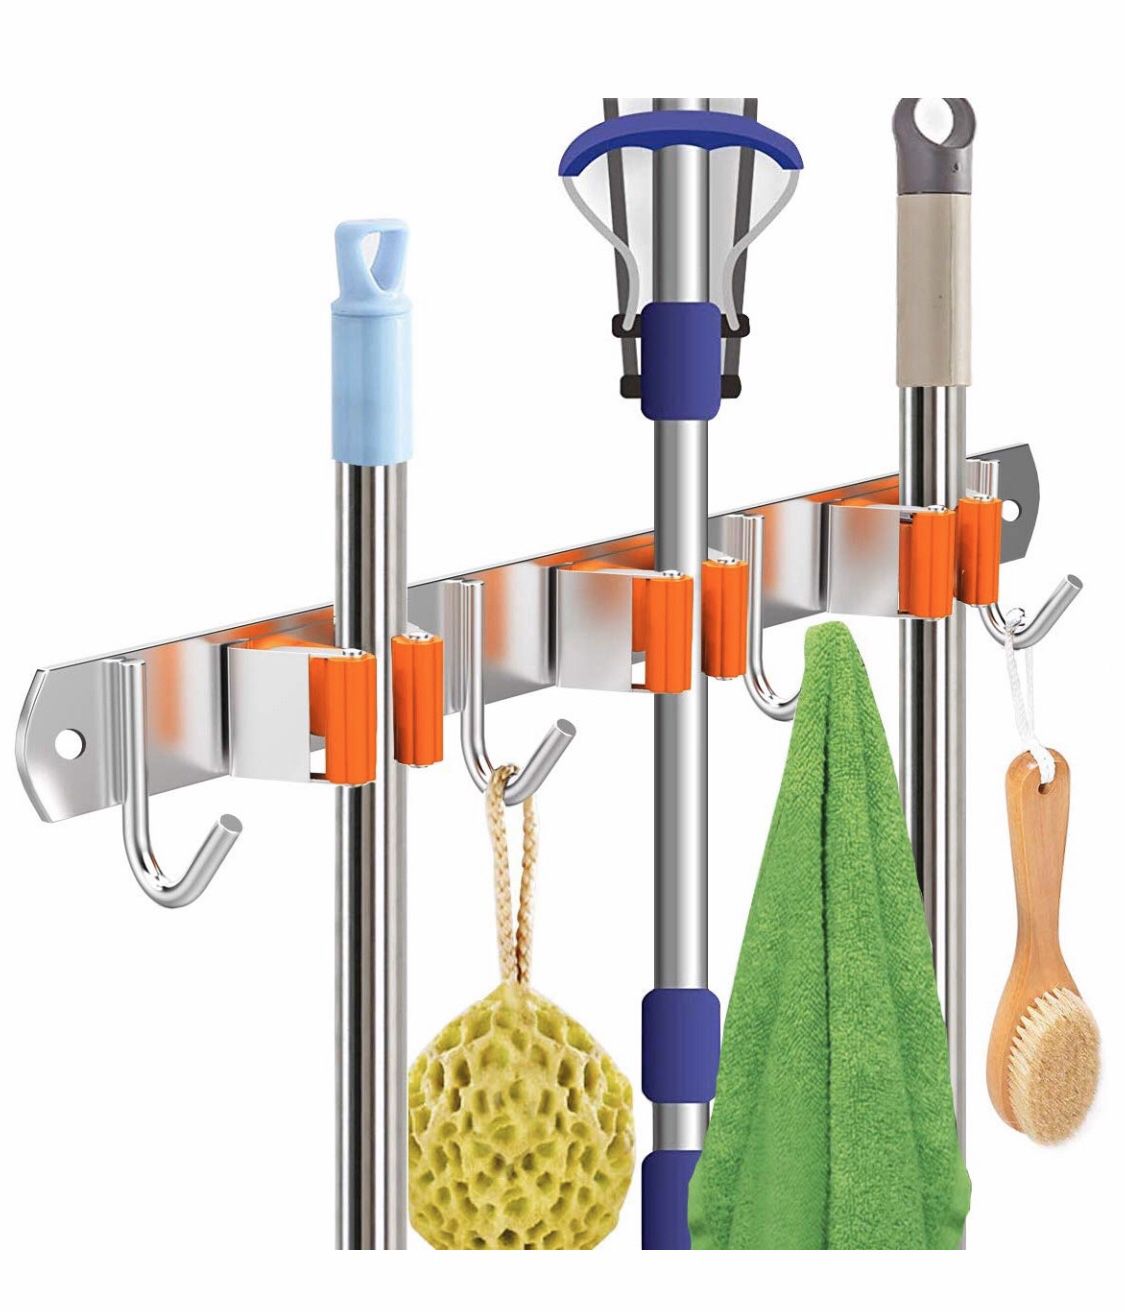 Broom Holder Wall Mounted, 5 Position with 6 Hooks Garage Pantry Organizer